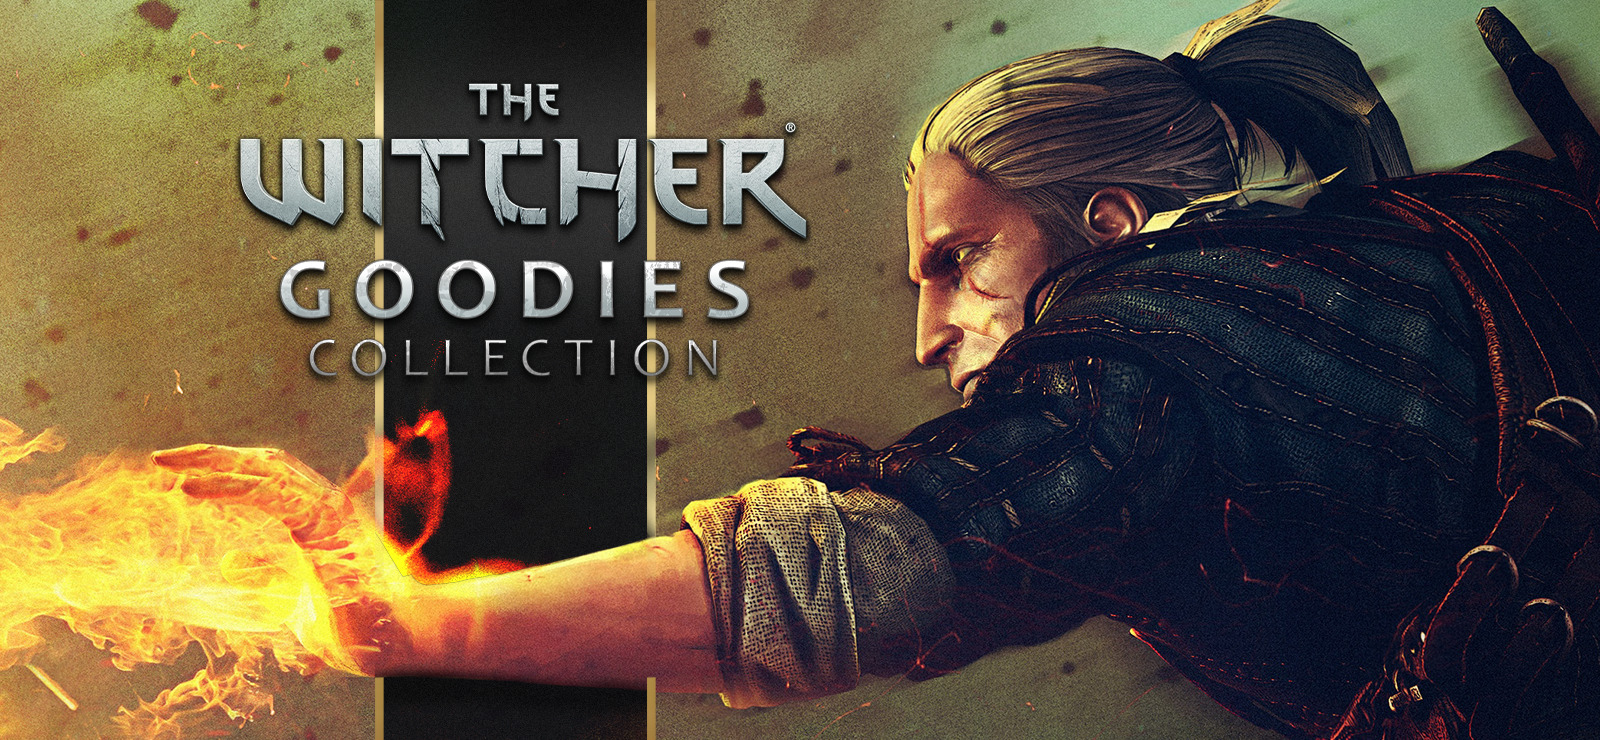 The Witcher - Goodies Collection GOG CD Key $2.54